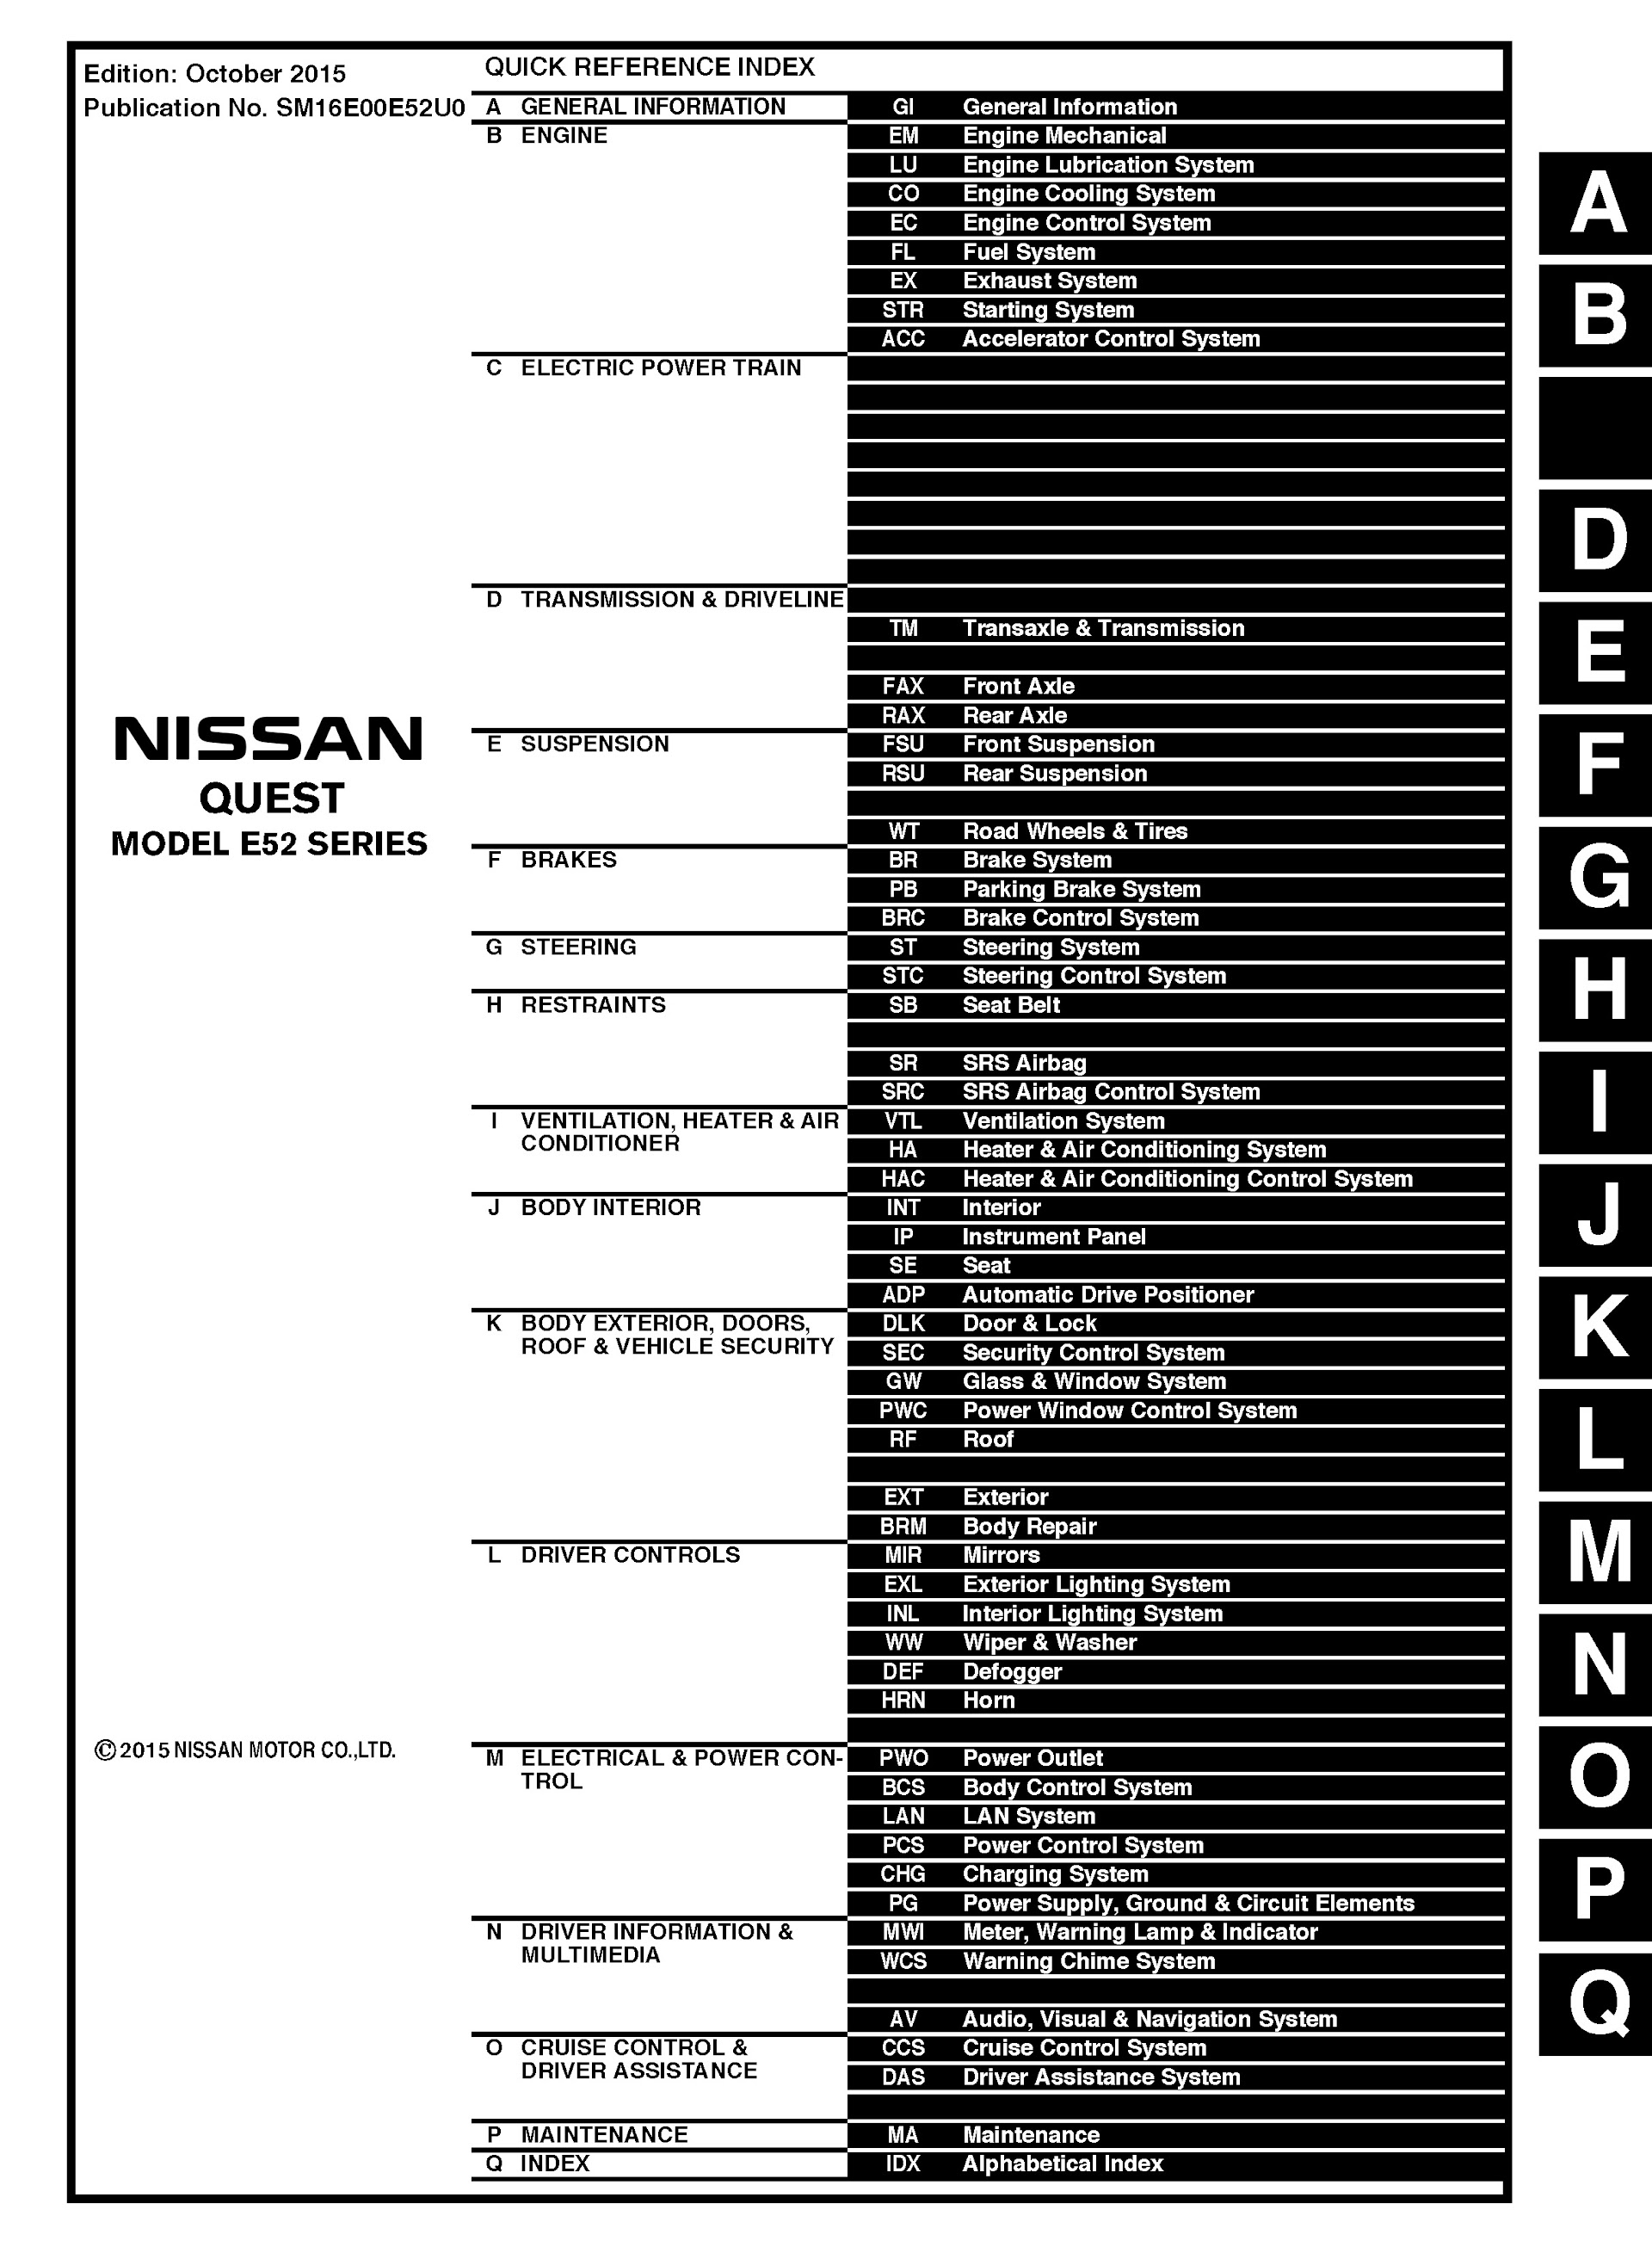 Table of Contents 2015 Nissan Quest Repair Manual